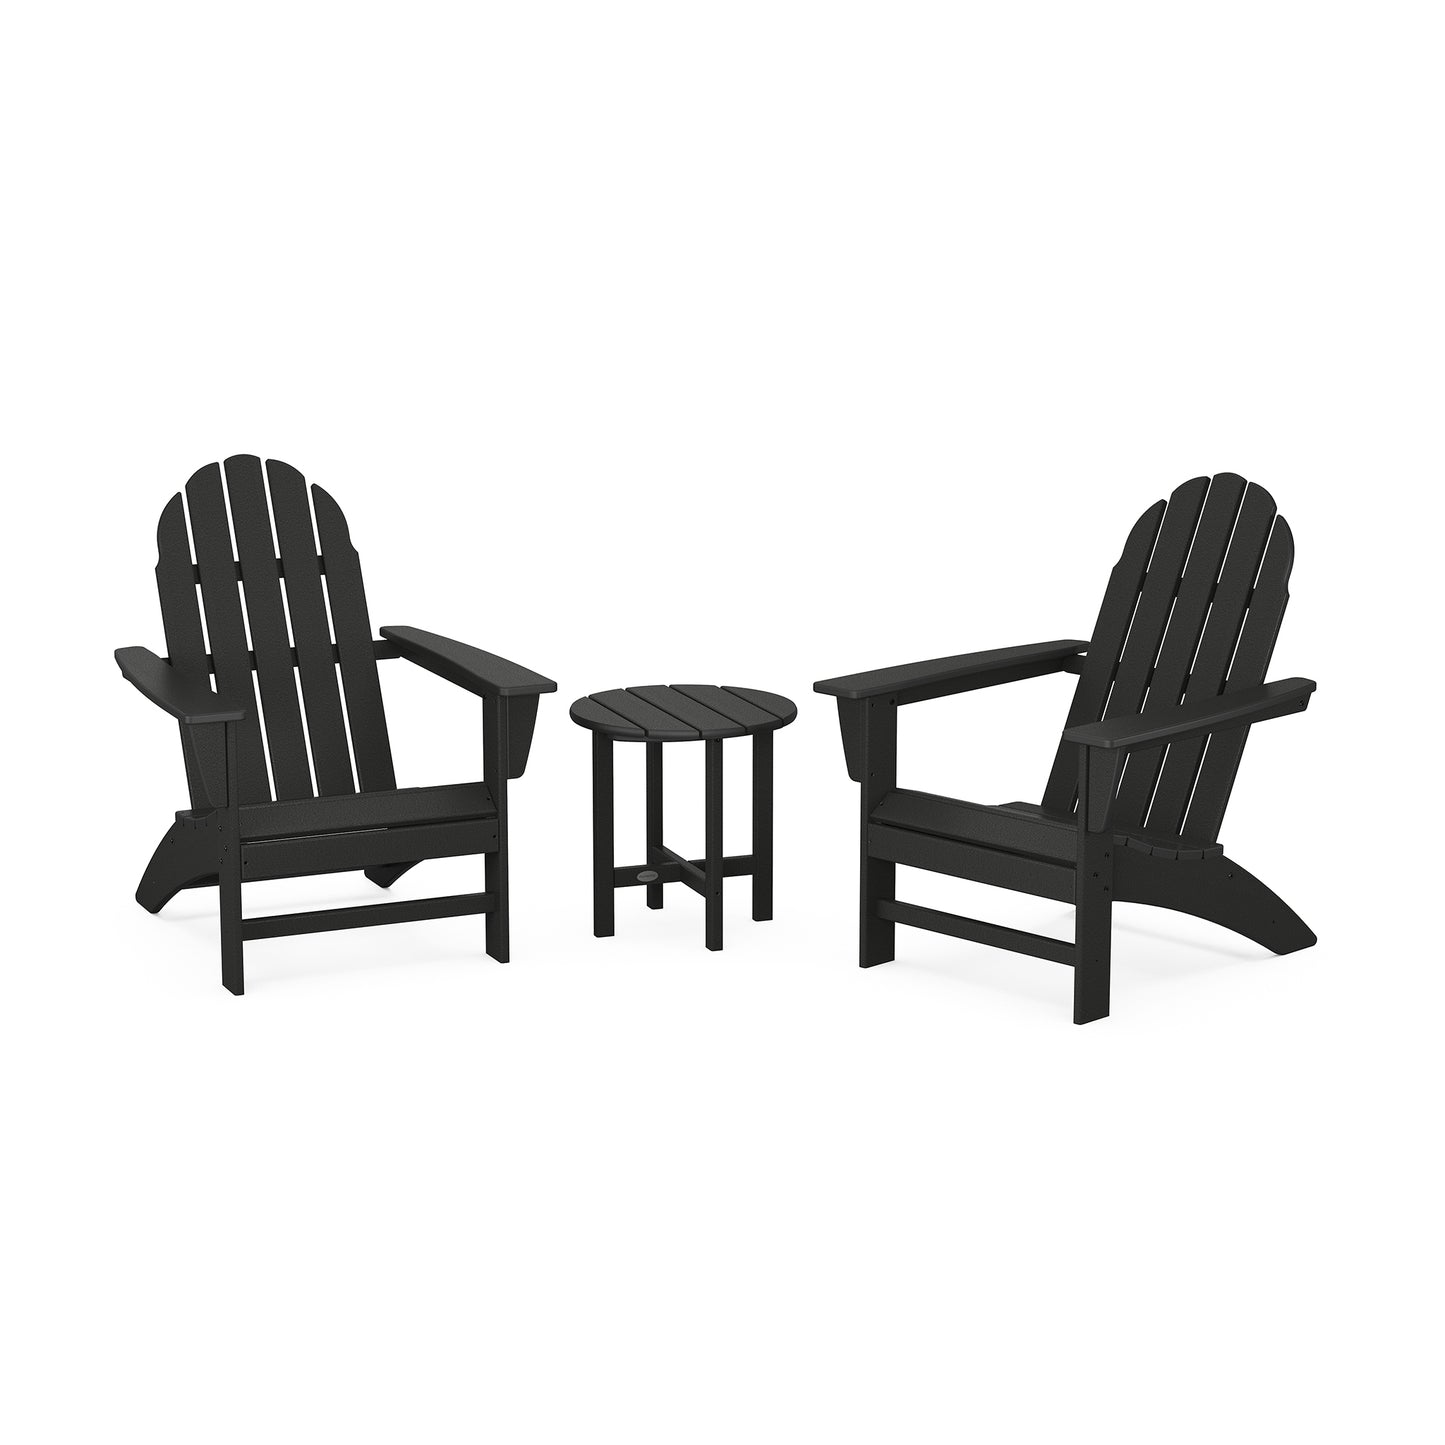 Two black POLYWOOD Vineyard Adirondack chairs facing each other with a small round matching table between them, set against a plain white background, form part of a POLYWOOD Vineyard 3-Piece Patio Set.